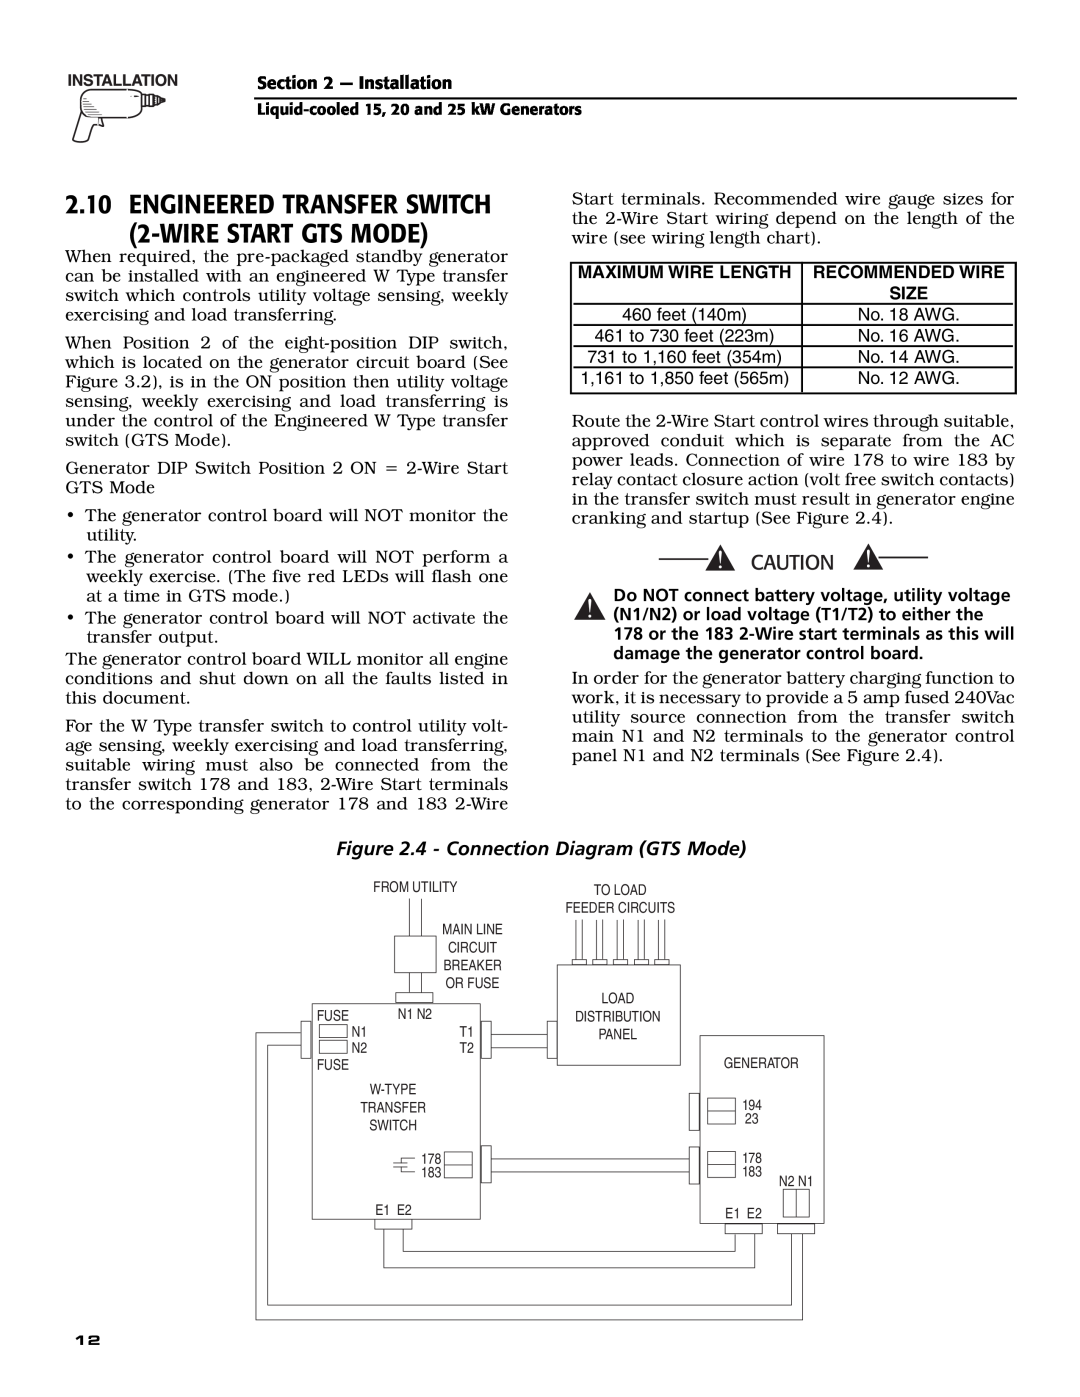 Generac 005028-0 ENGINEERED TRANSFER SWITCH 2-WIRE START GTS MODE, 4 - Connection Diagram GTS Mode, Maximum Wire Length 